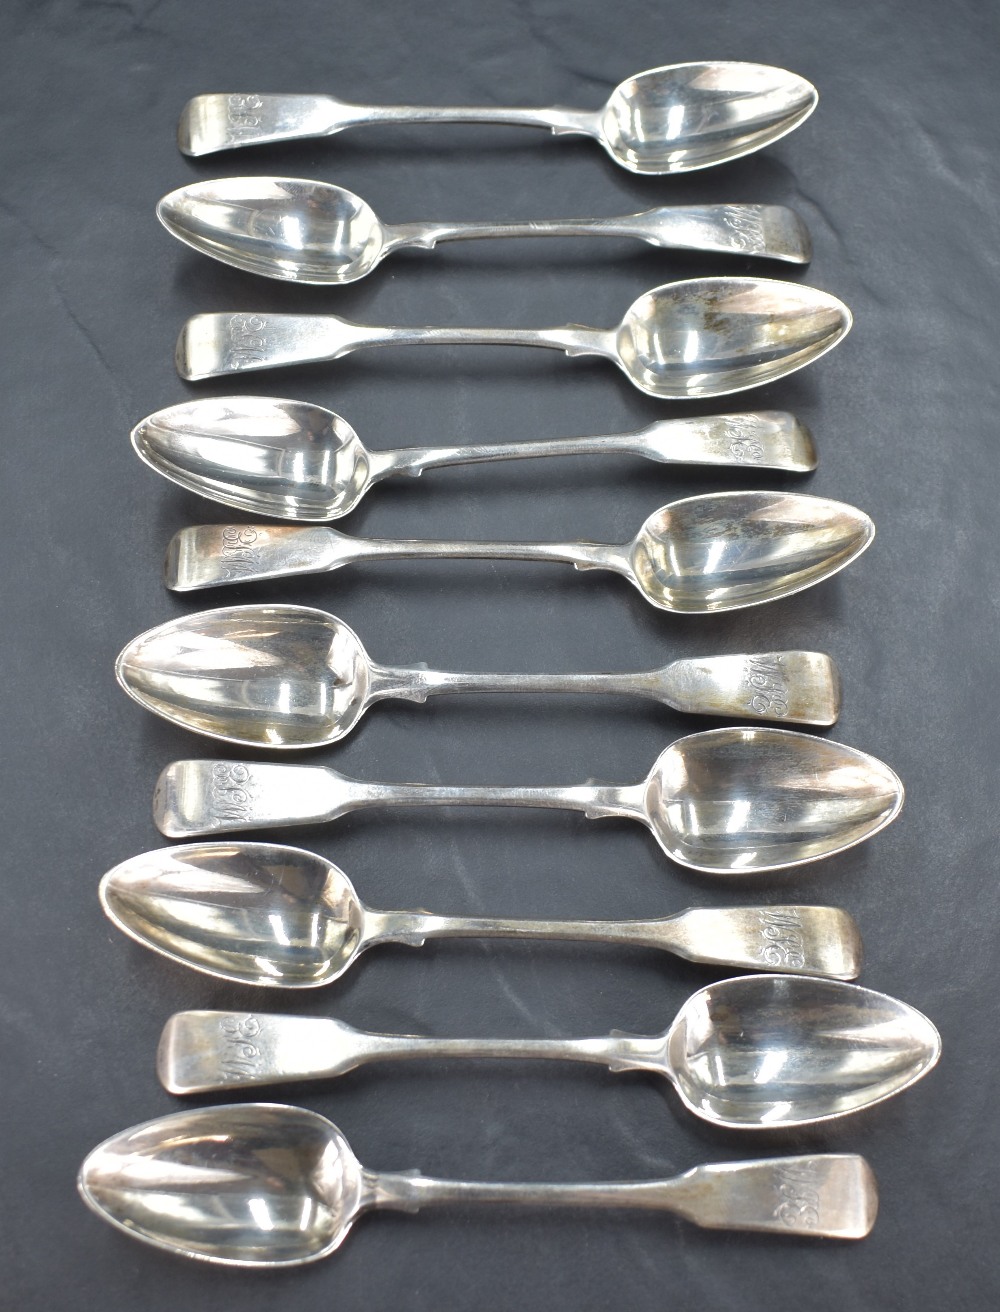 A set of ten George IV silver spoons, fiddle pattern with engraved initials WPE, marks for London